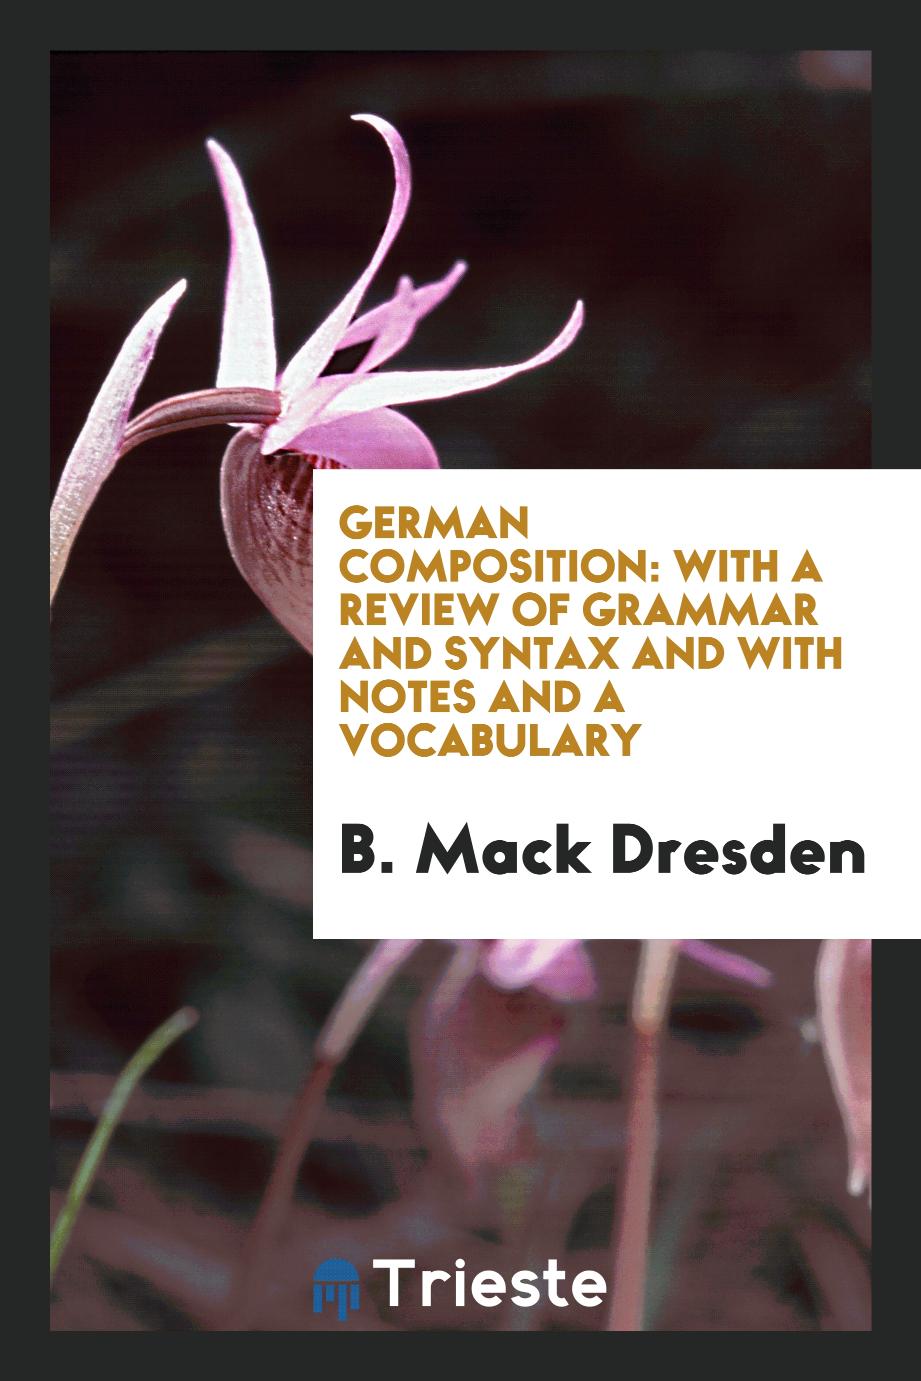 German Composition: With a Review of Grammar and Syntax and with Notes and a Vocabulary